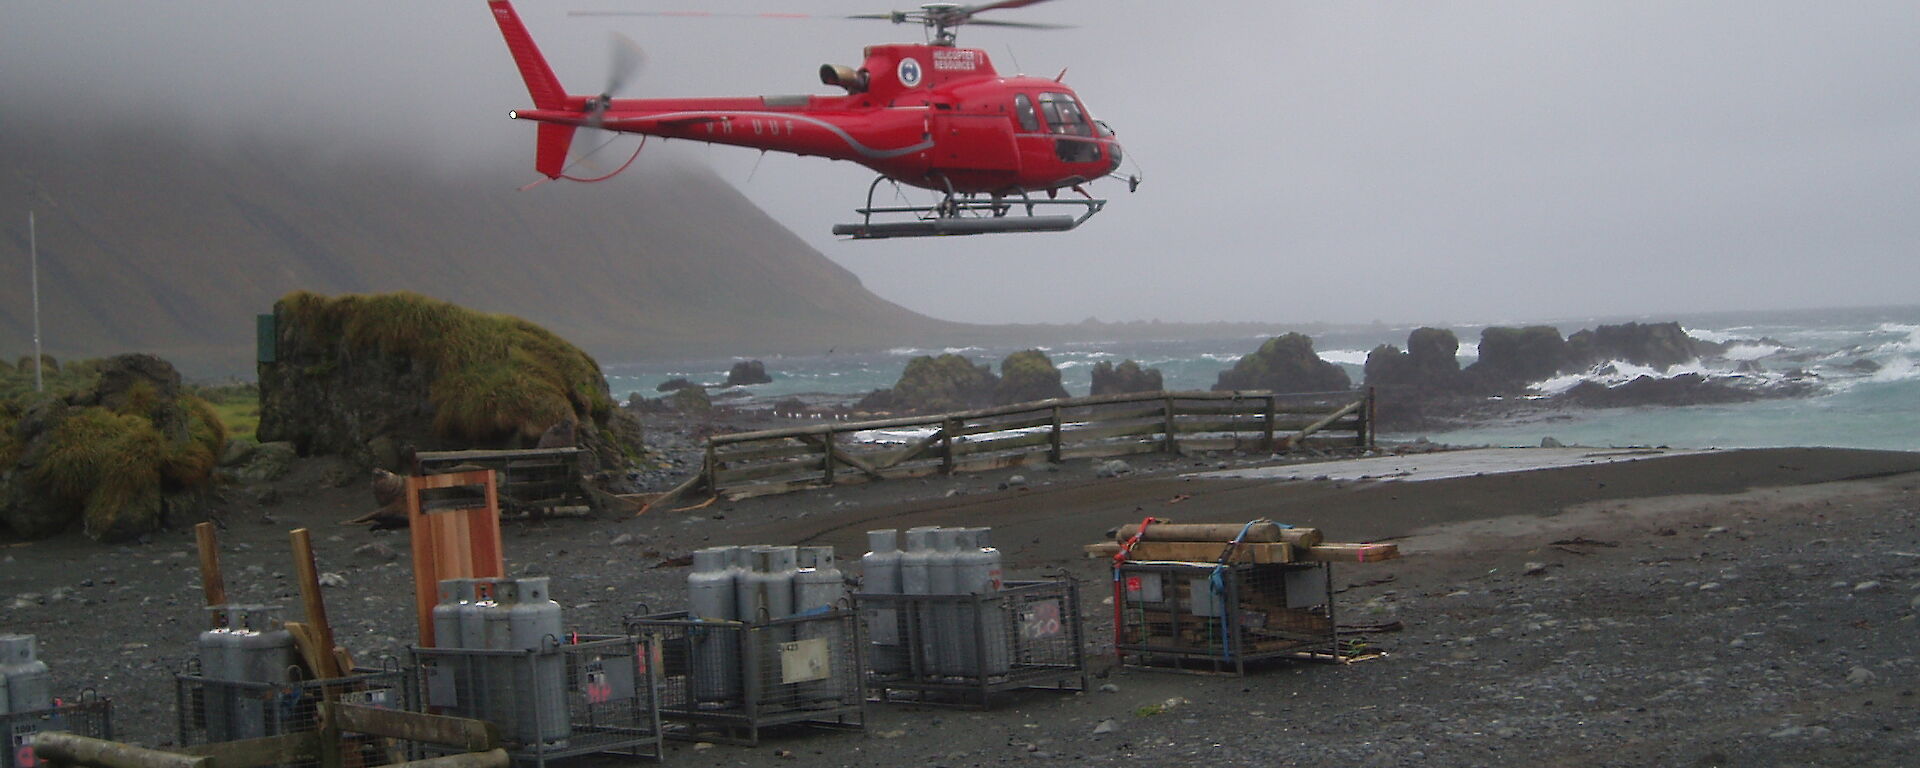 A helicopter lands amongst cargo on a dark and pebble covered beach